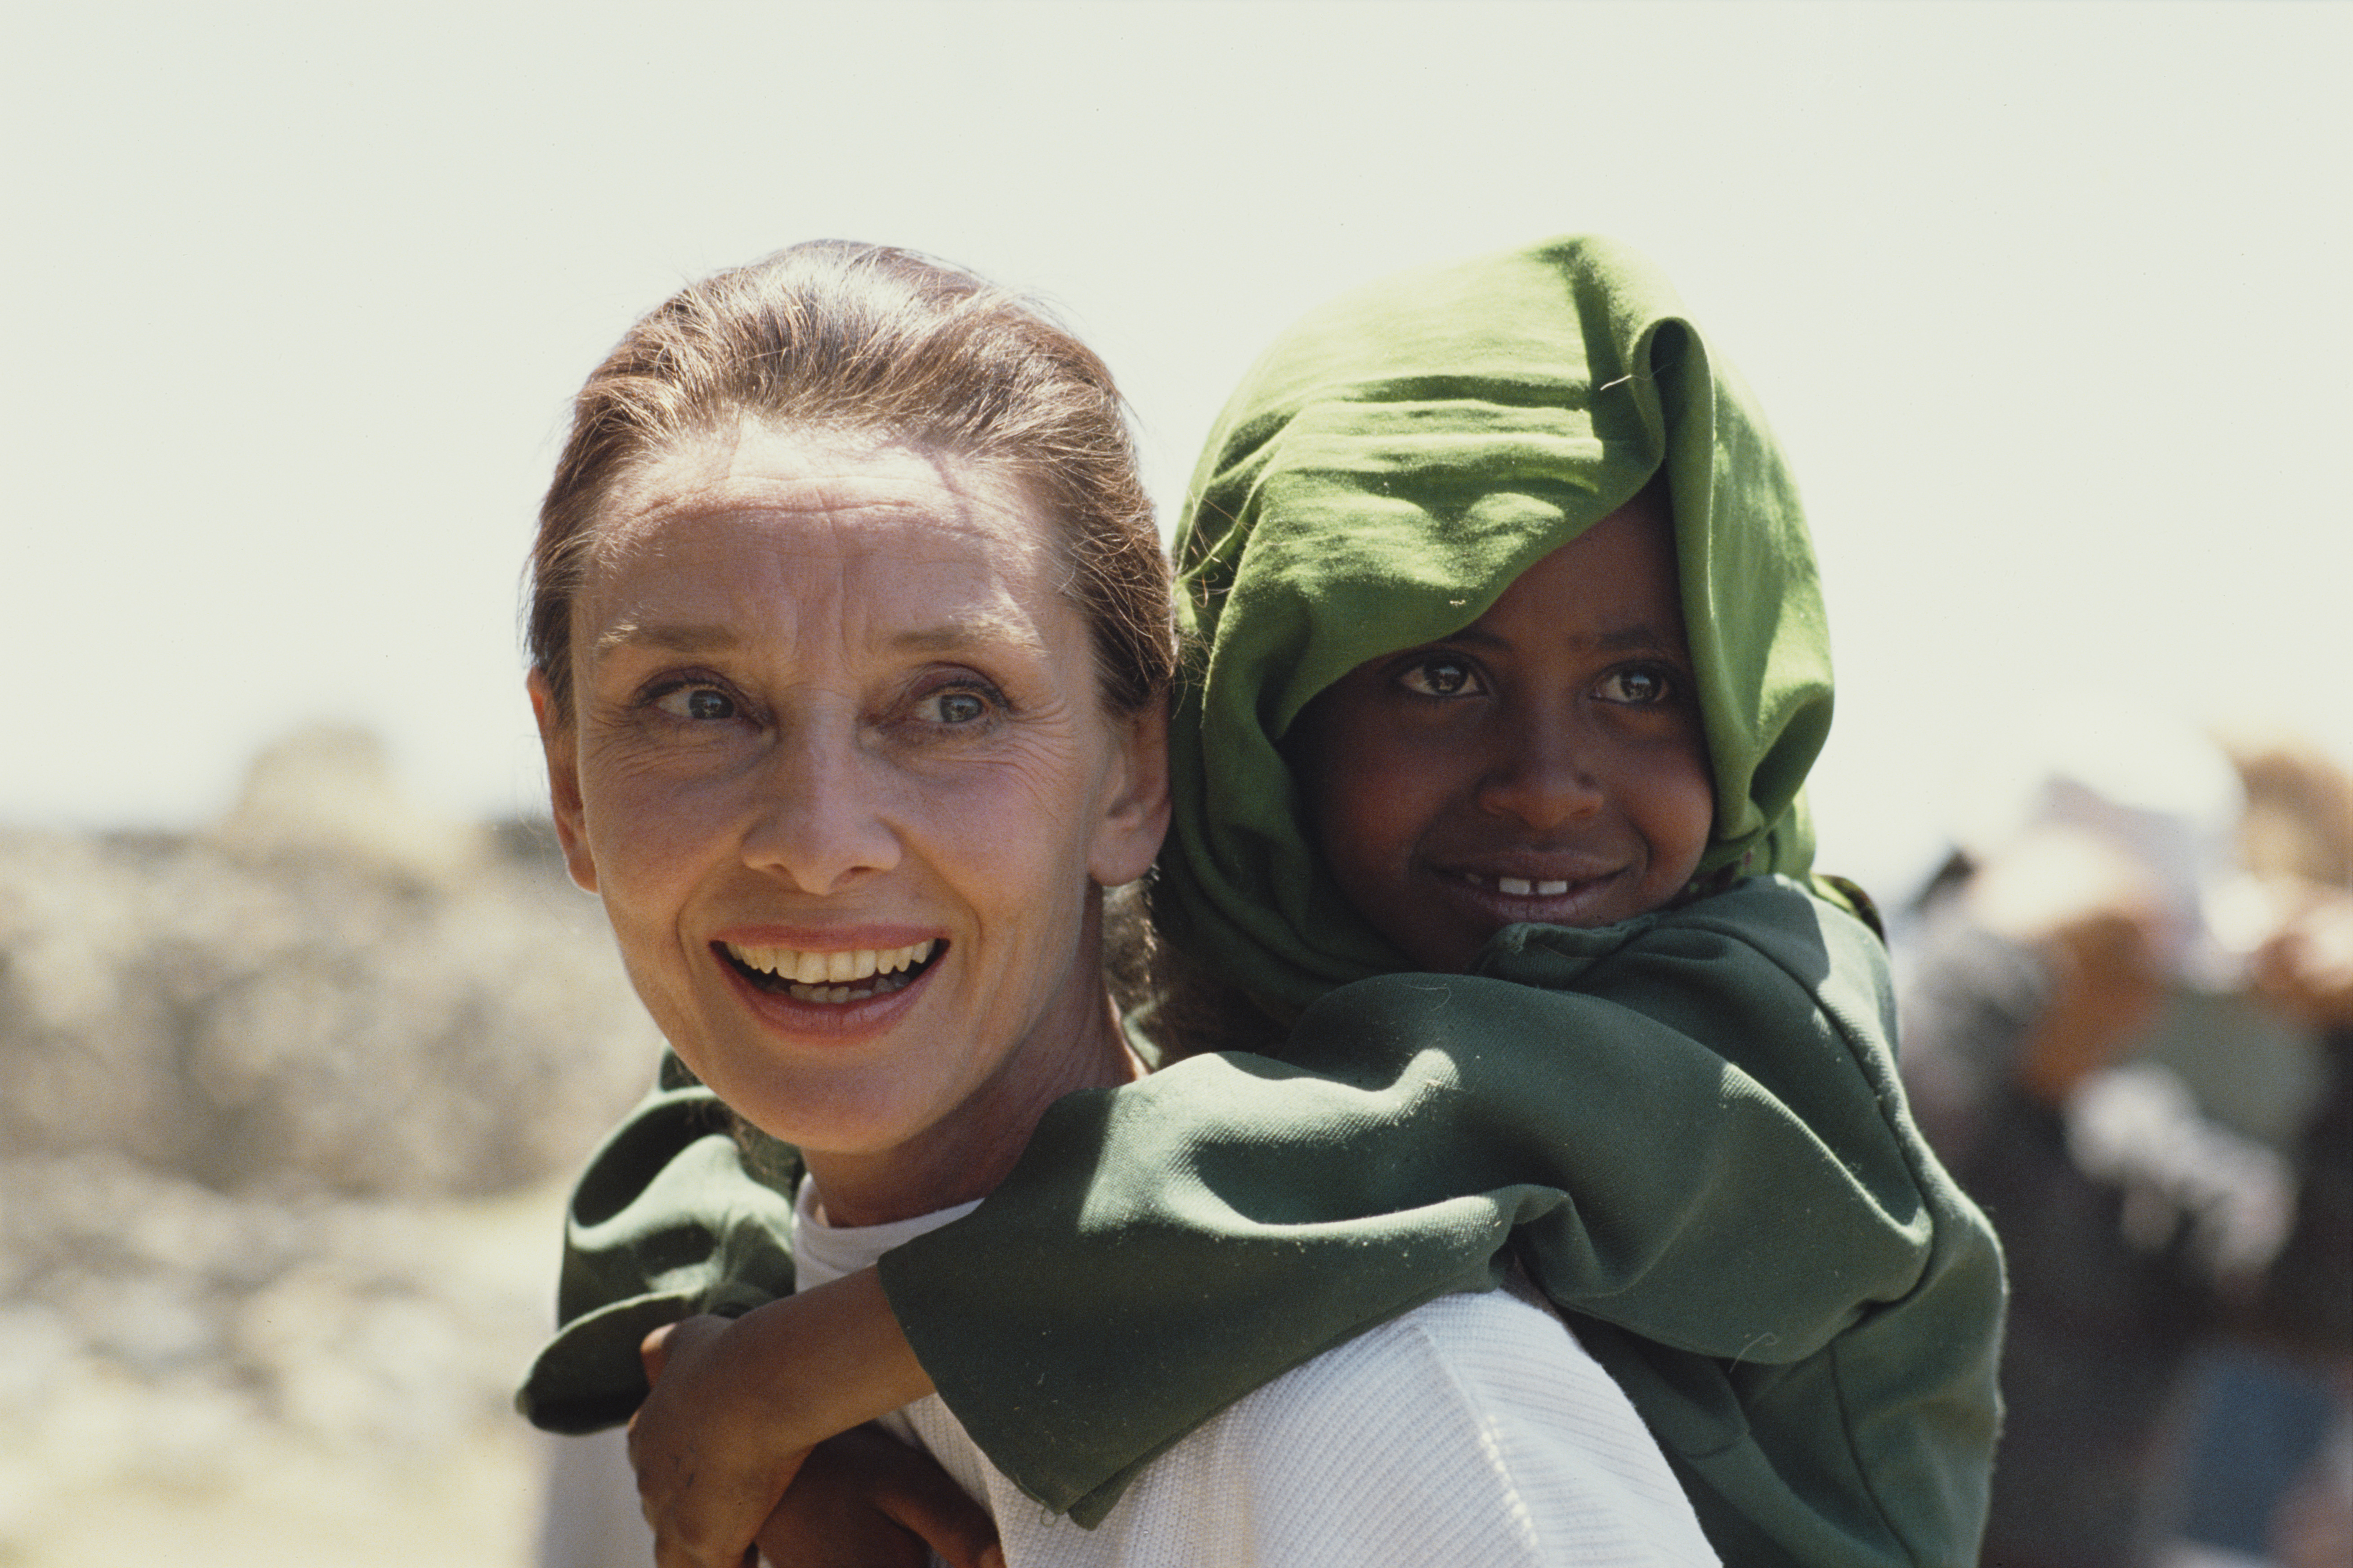 Audrey Hepburn carrying an Ethiopian girl on her back while on her first field mission for UNICEF in Ethiopia, in March 1988. | Source: Getty Images